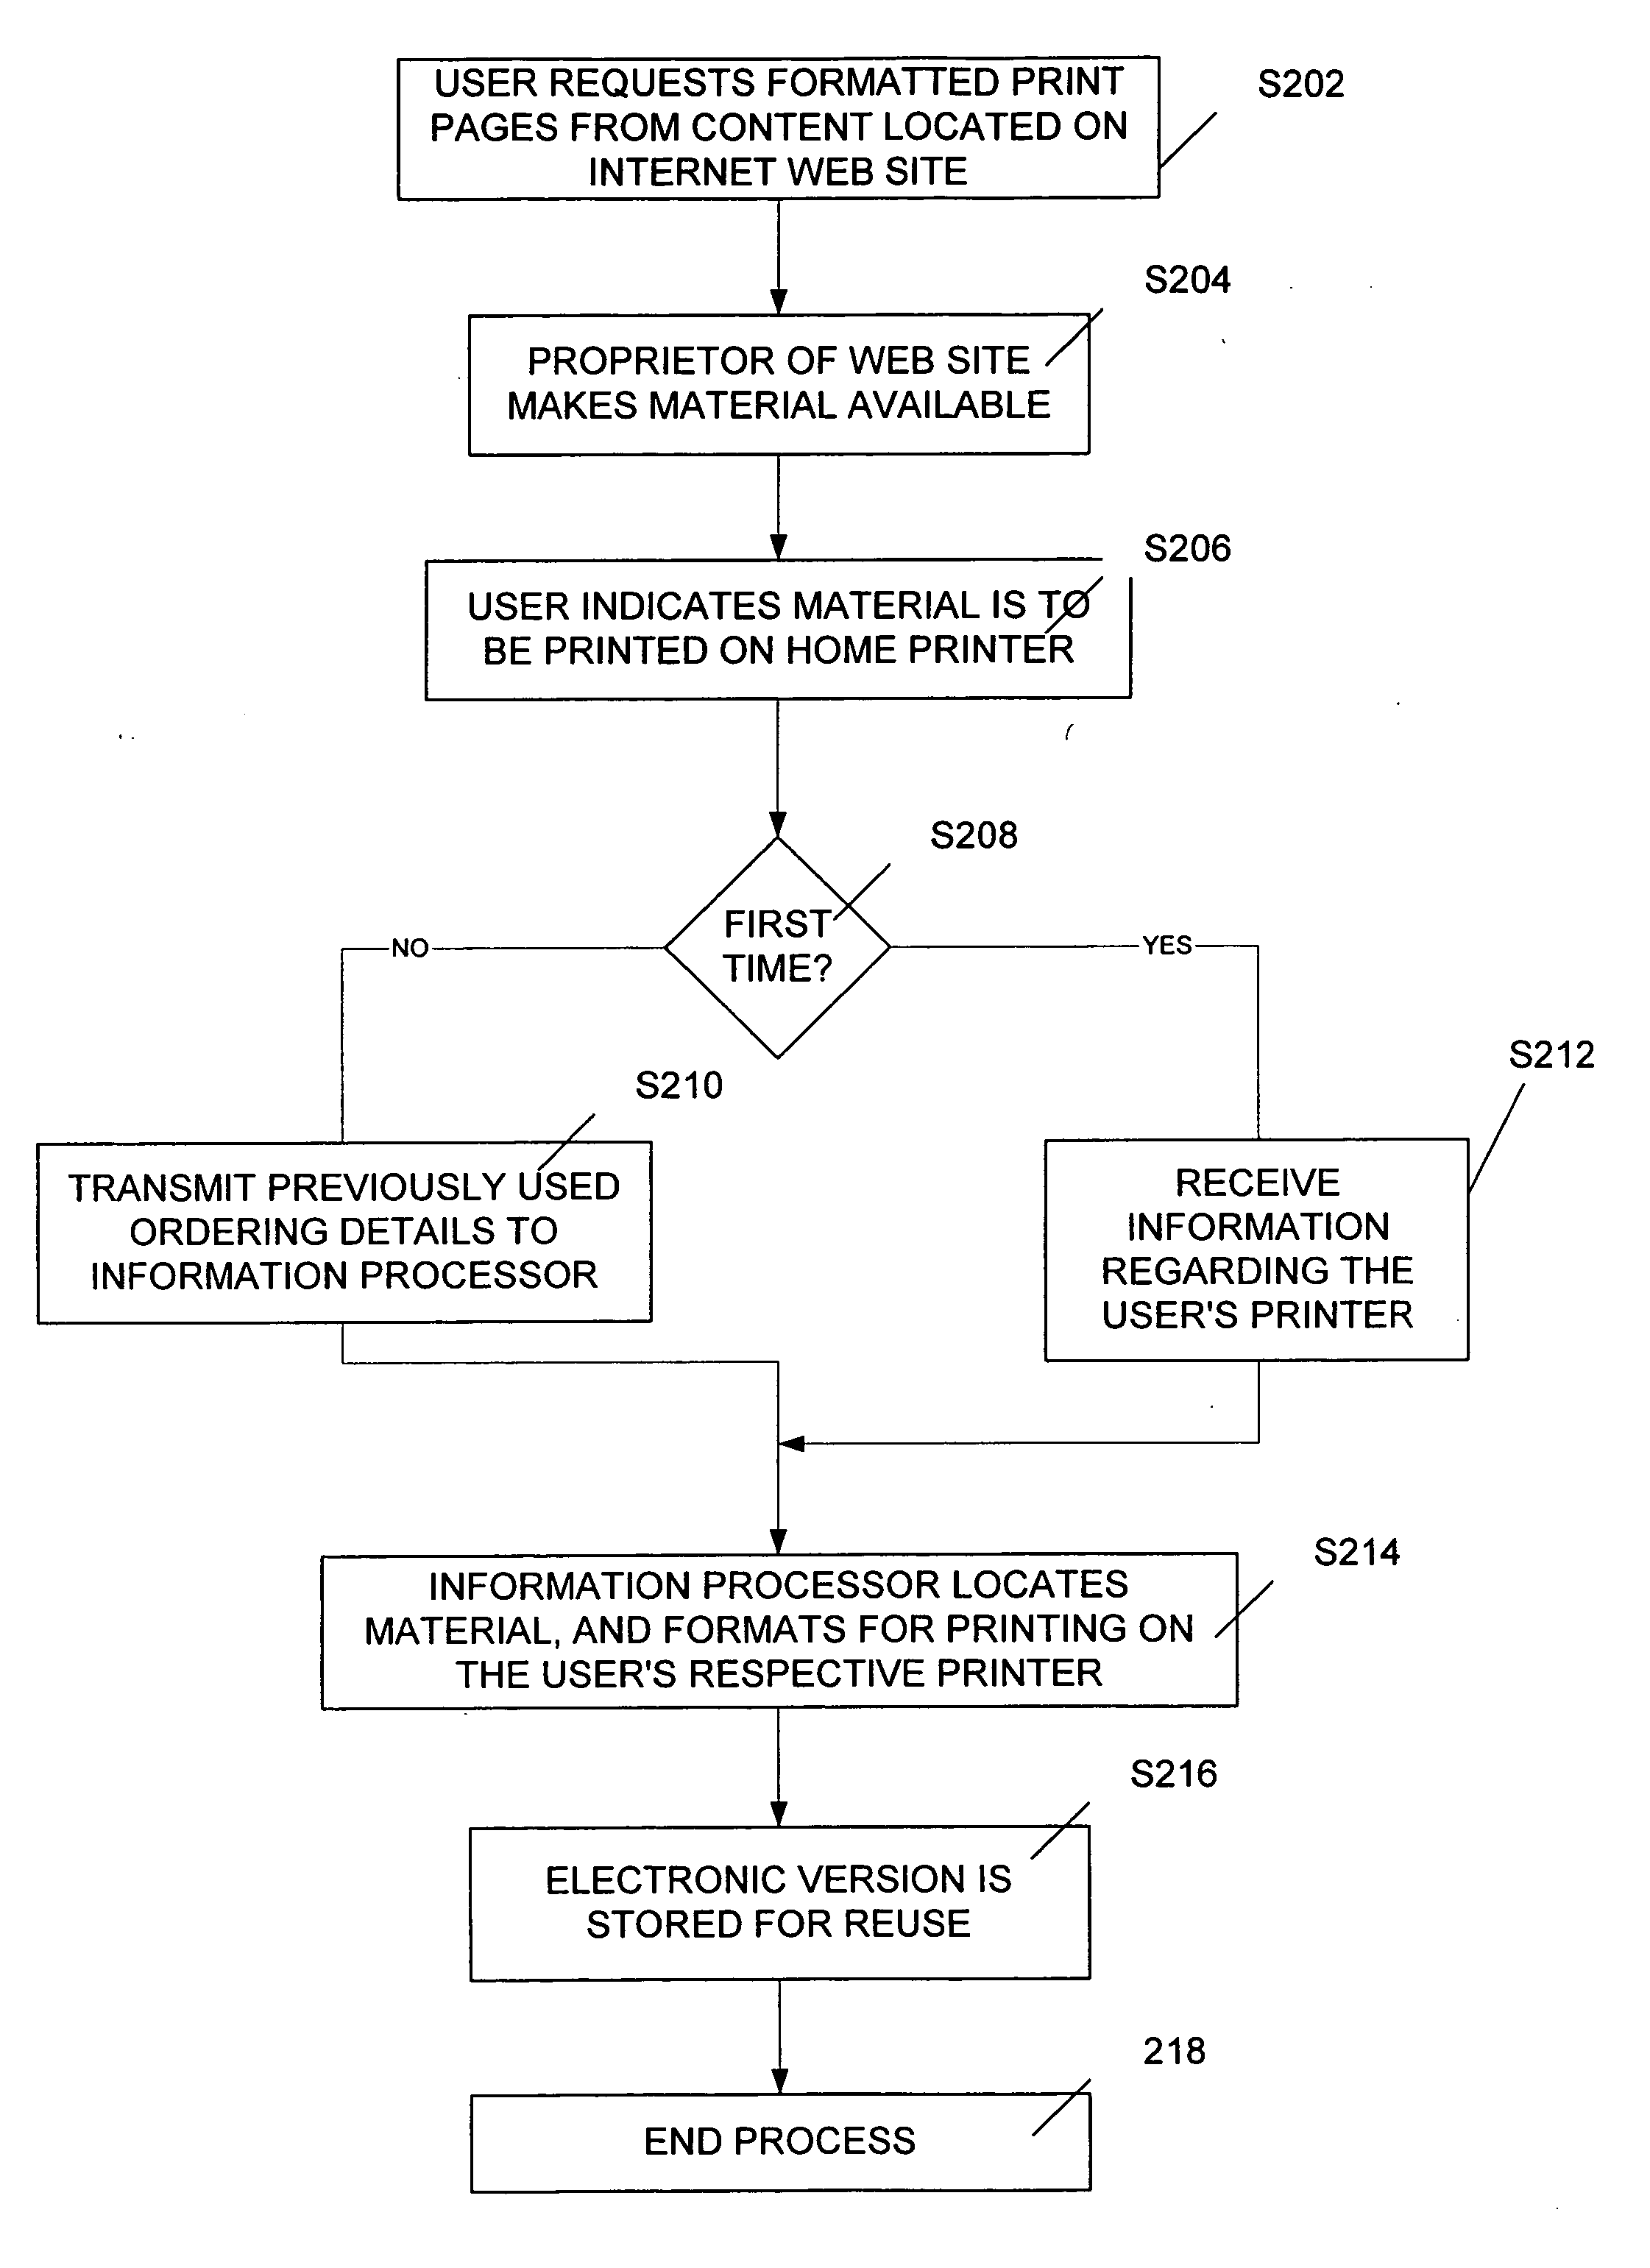 System and method for providing formatted print pages